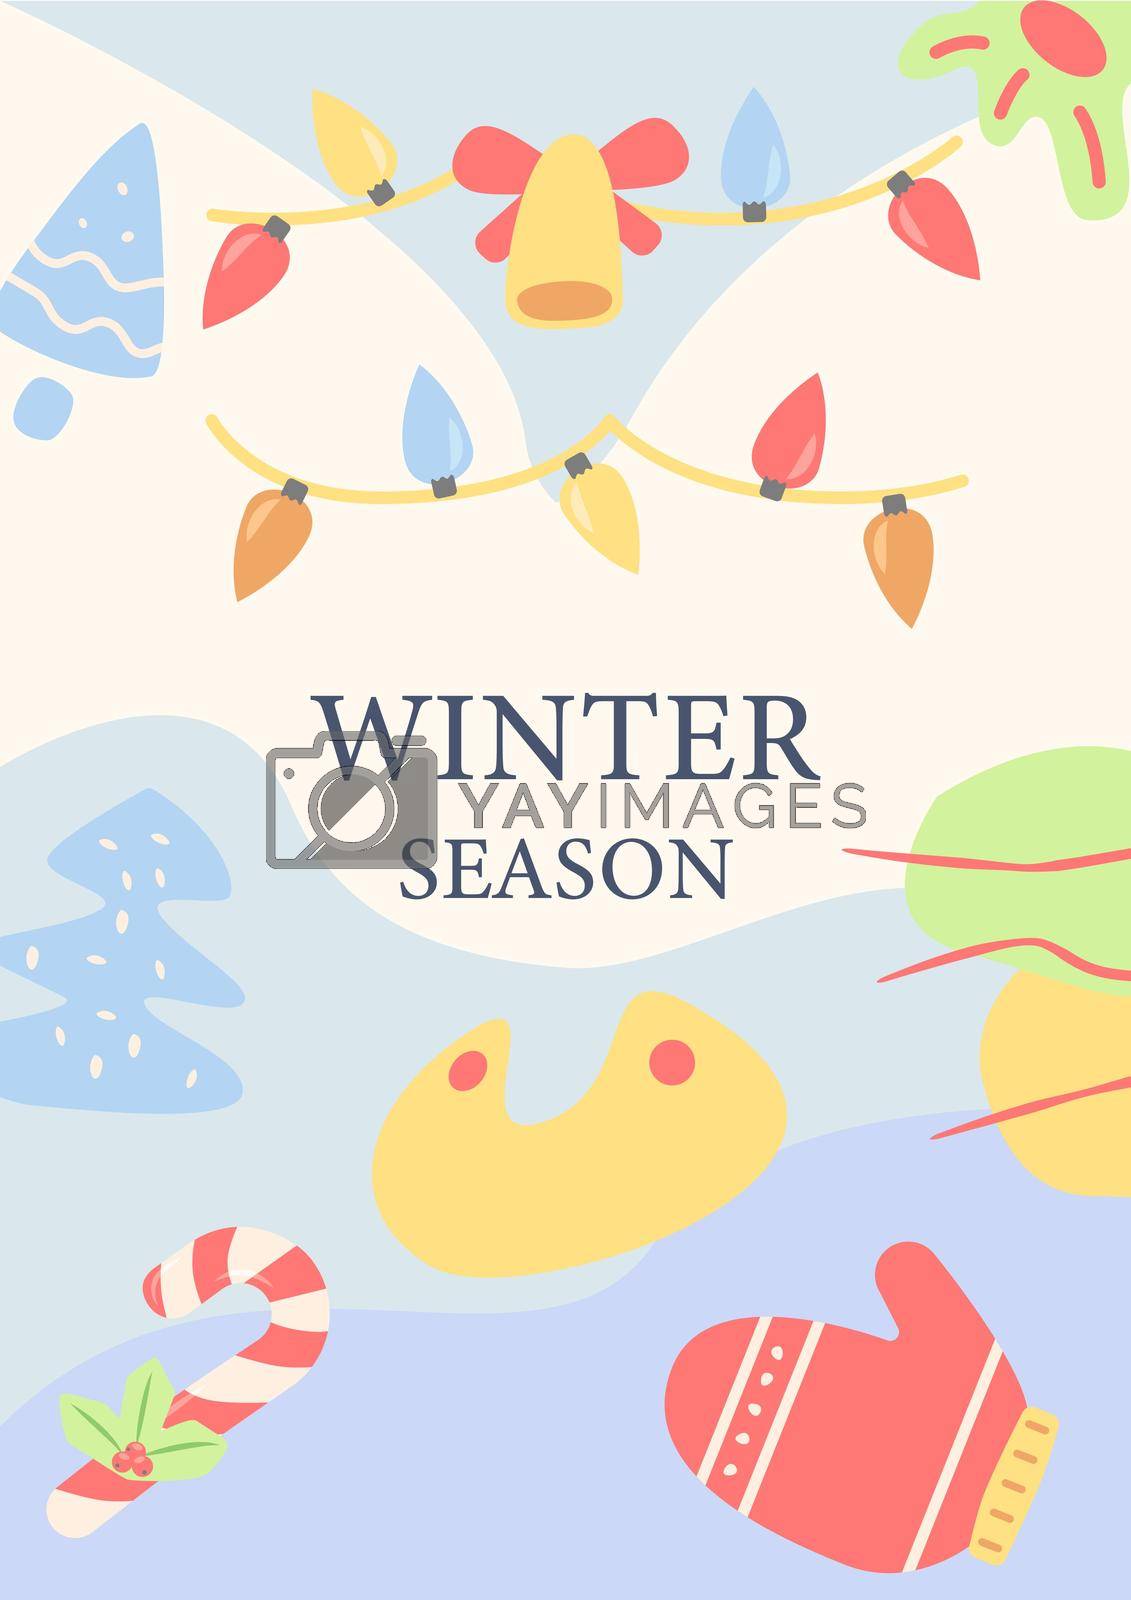 New Year celebration abstract poster template. Winter season. Commercial flyer design with flat illustration. Vector cartoon promo card with organic shapes. Wintertime advertising invitation